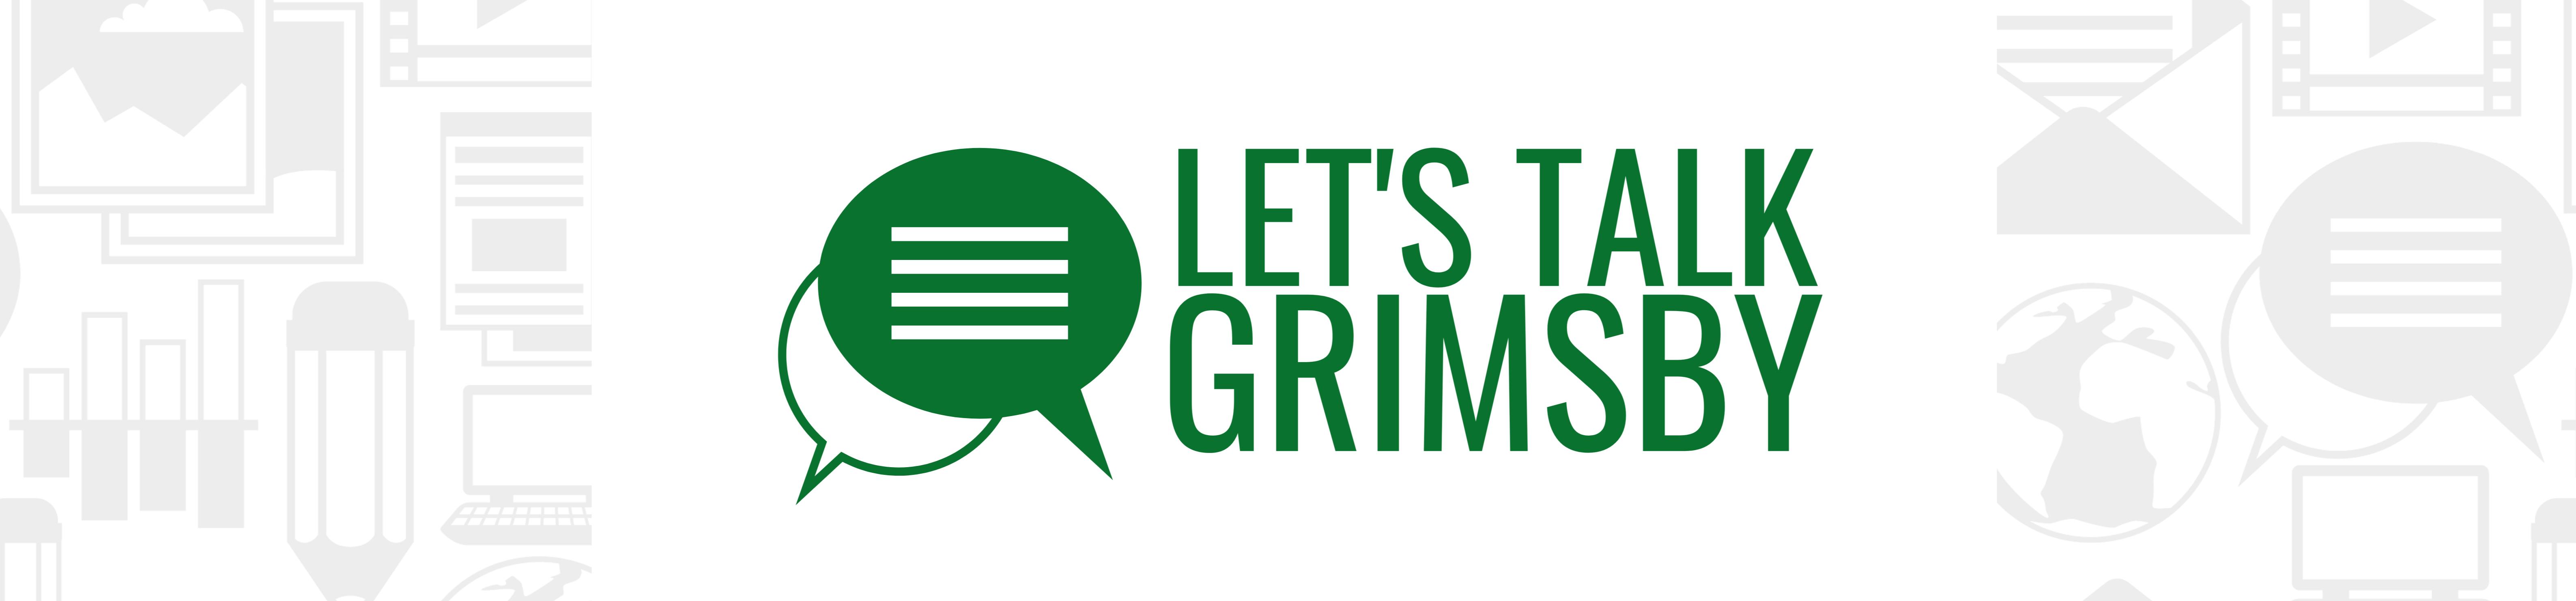 Lets Talk Grimsby words with a text bubble image